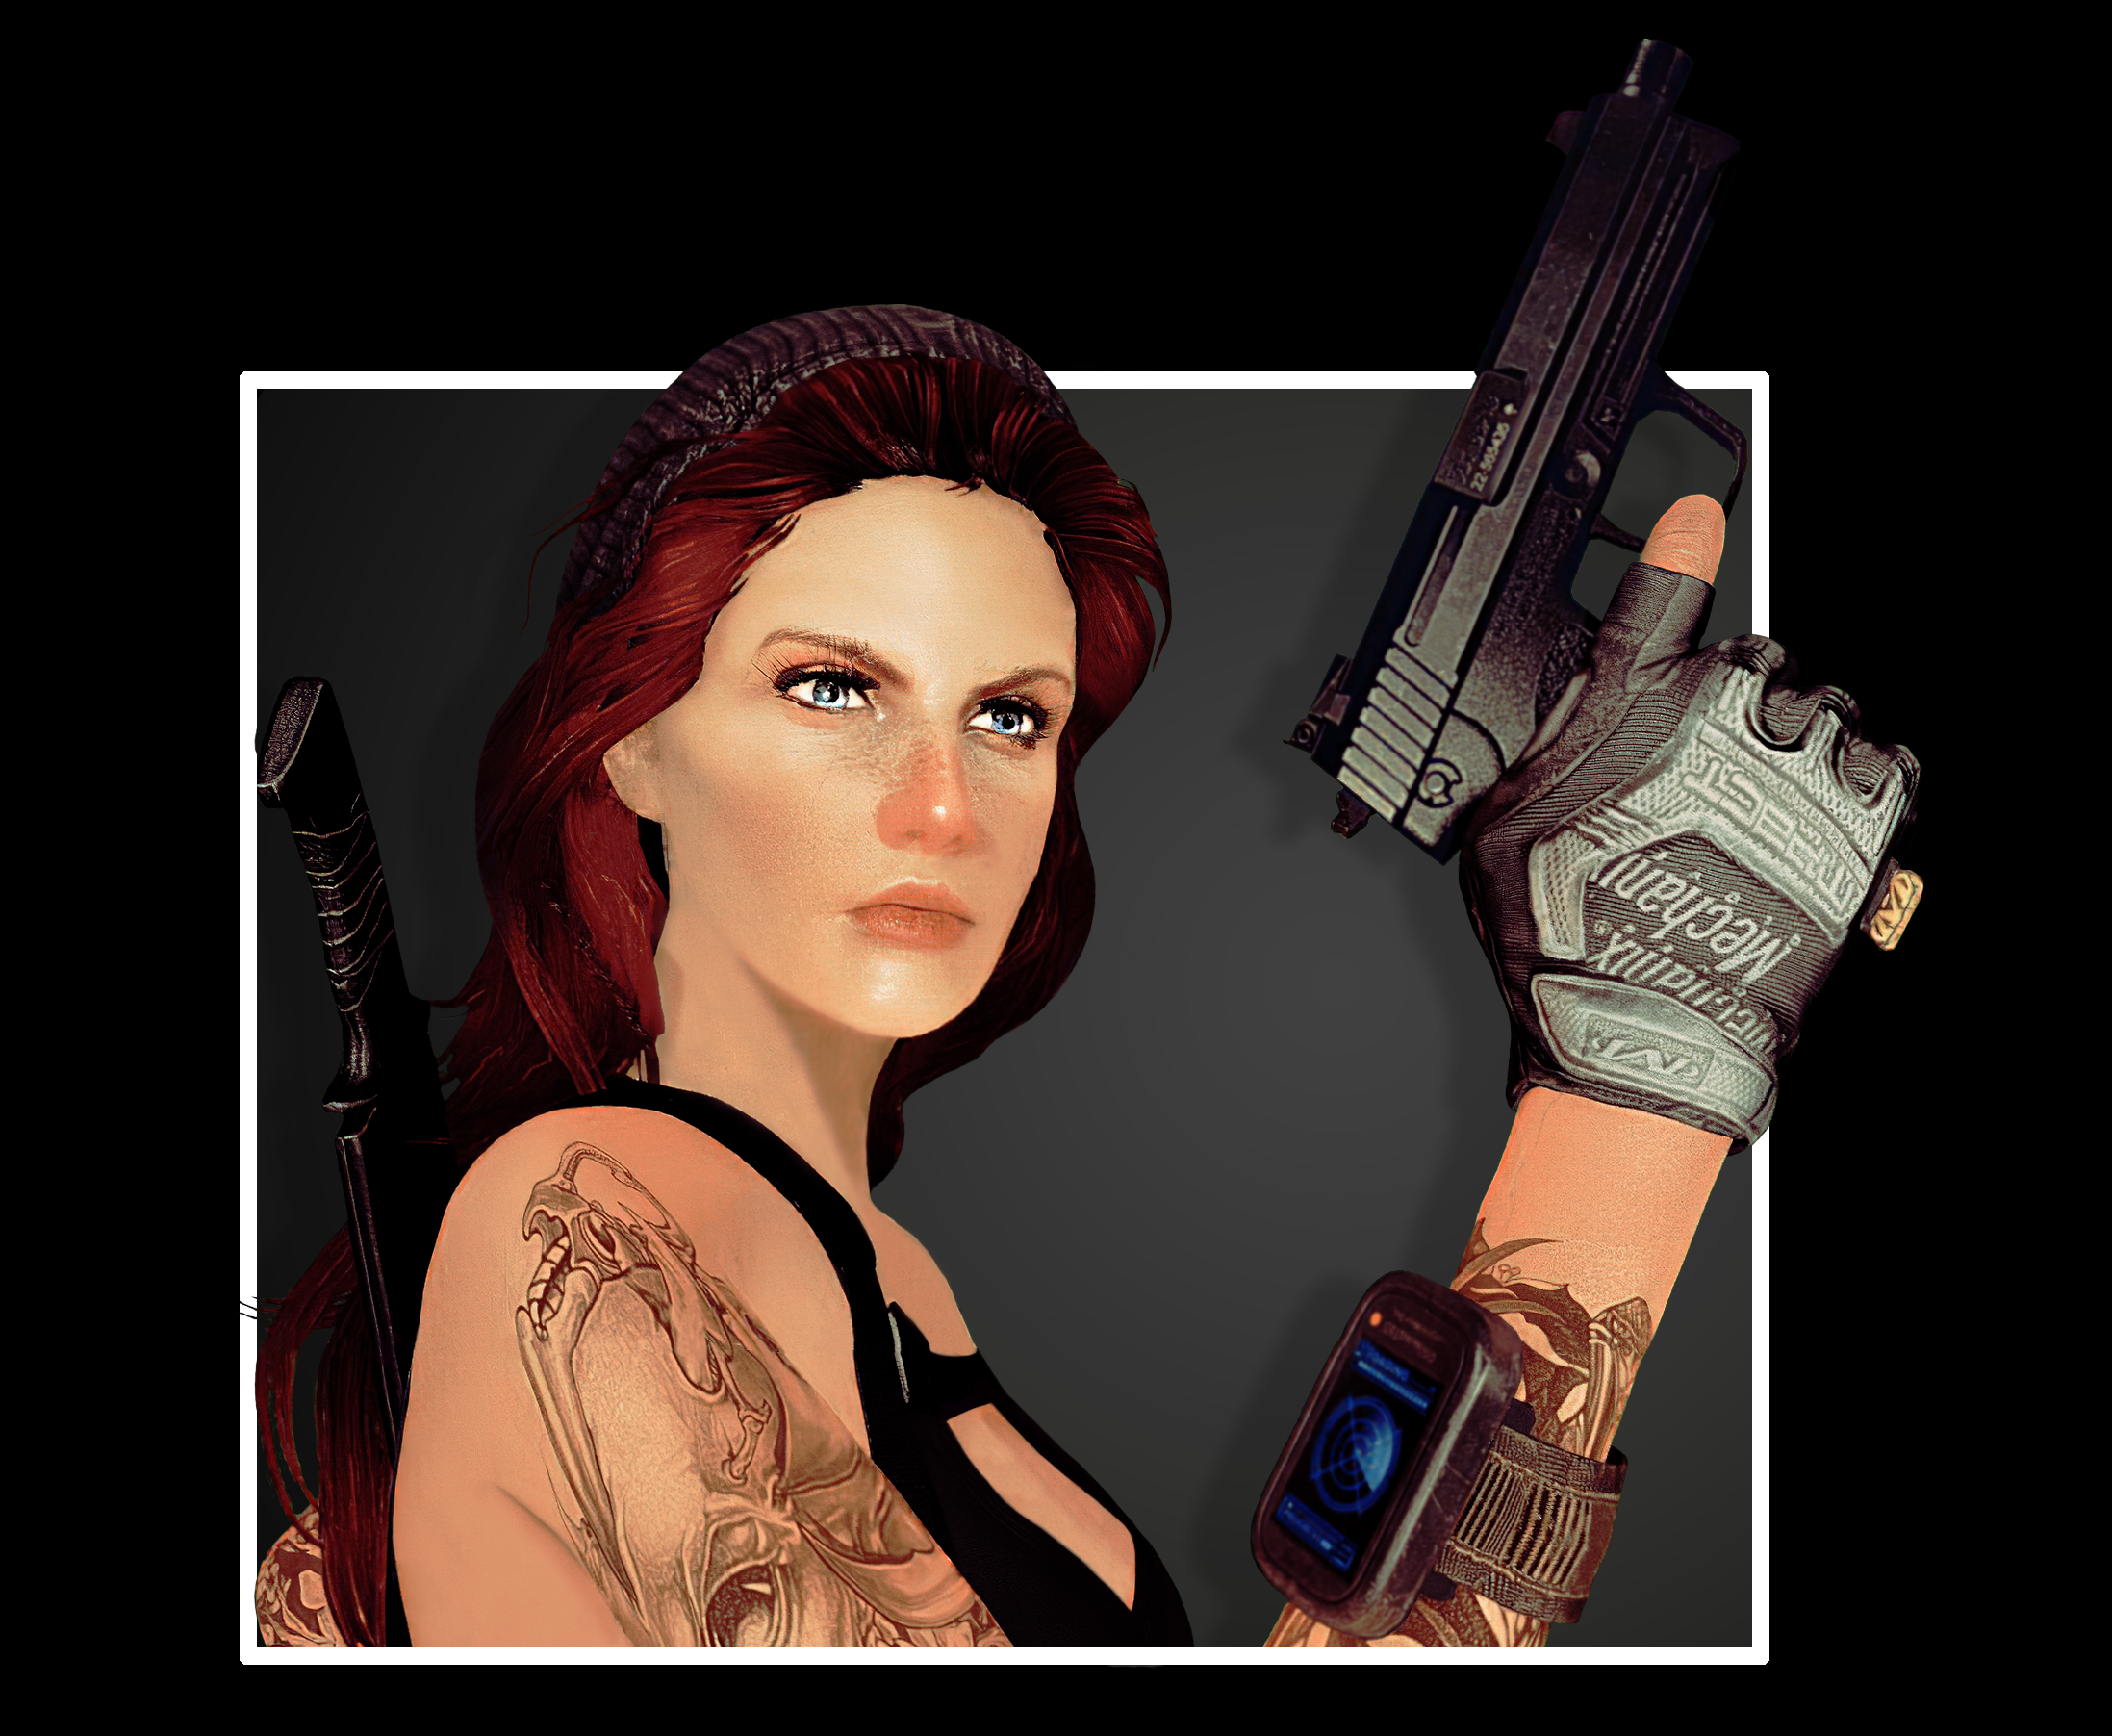 Redhead Weapon Tactical 2195x1804